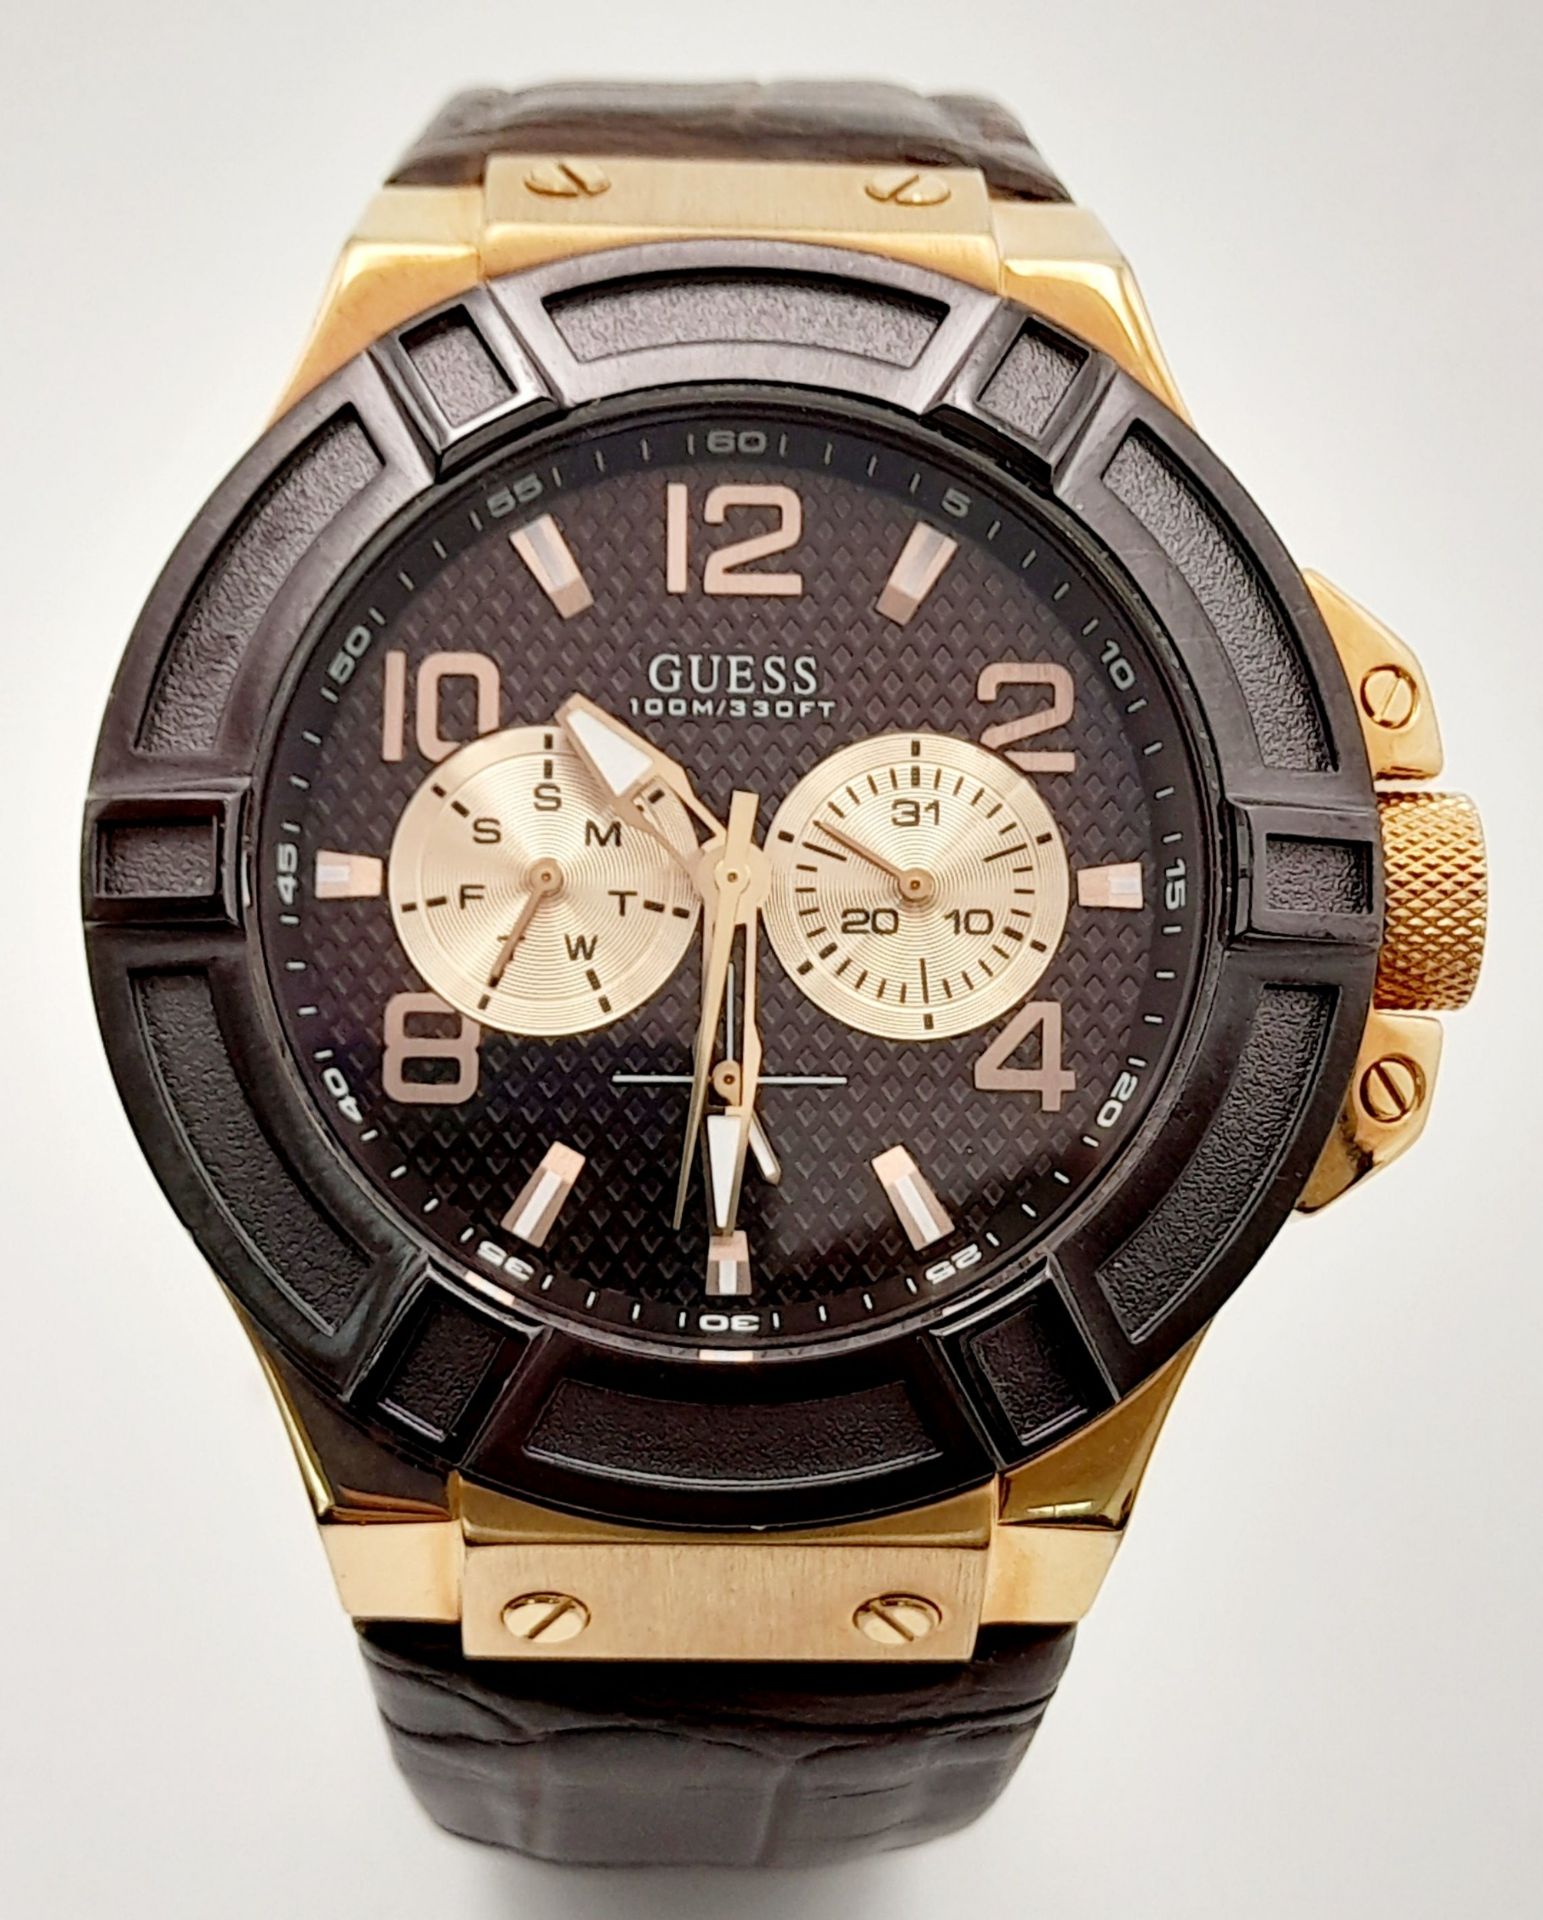 A Men’s Rose Gold-Toned Sports Fashion Watch by Guess (45mm Case). Full Working Order. - Bild 5 aus 6